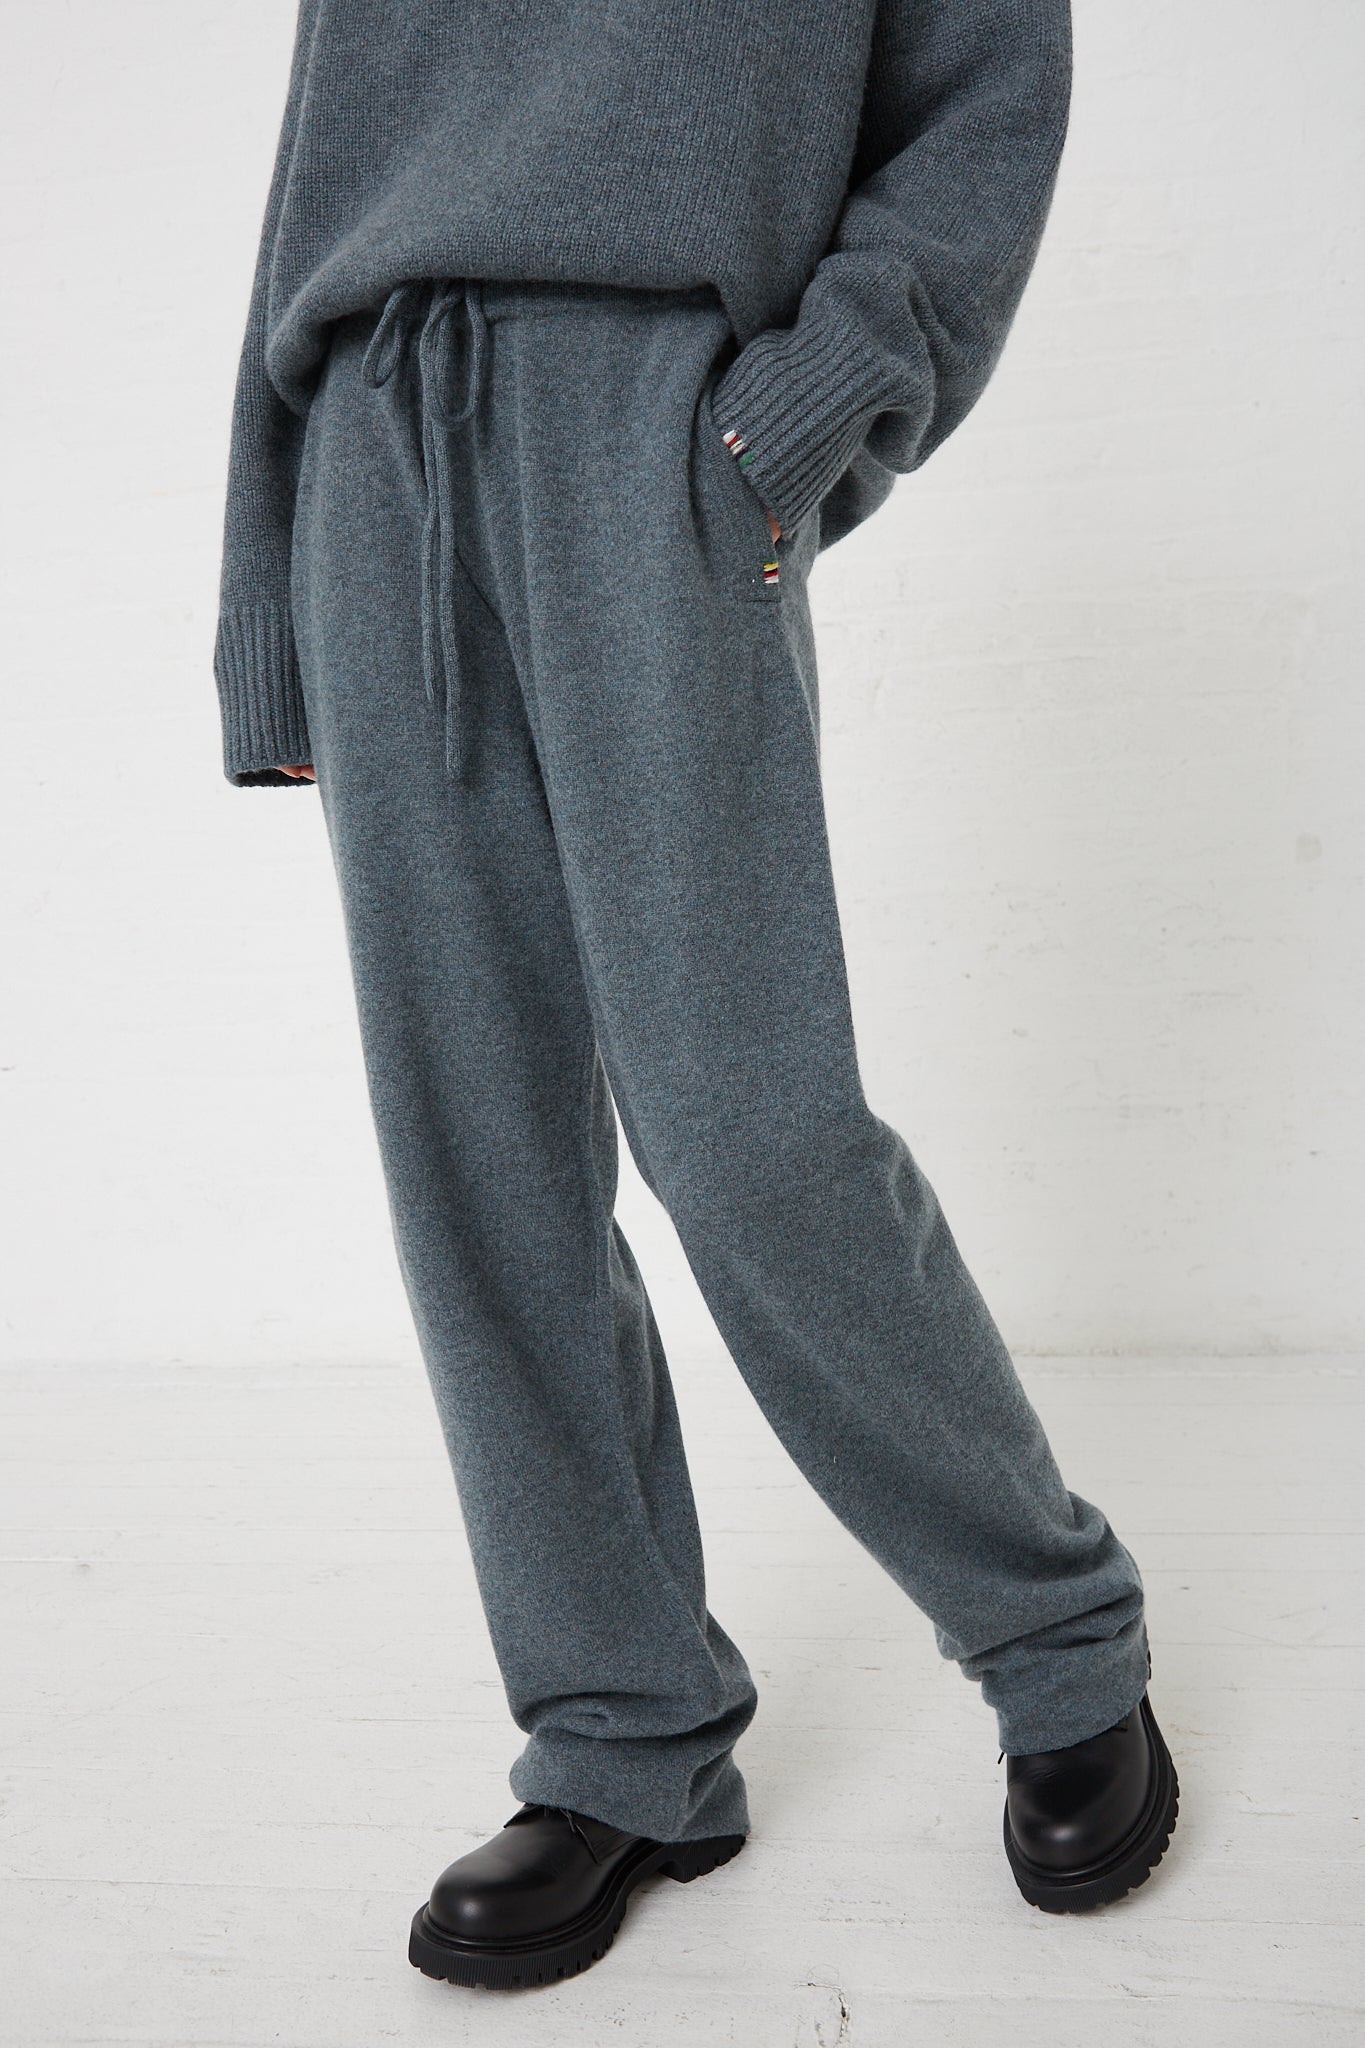 The model is wearing the Extreme Cashmere No. 320 Rush Trouser in Wave with a drawstring waist and grey sweater.